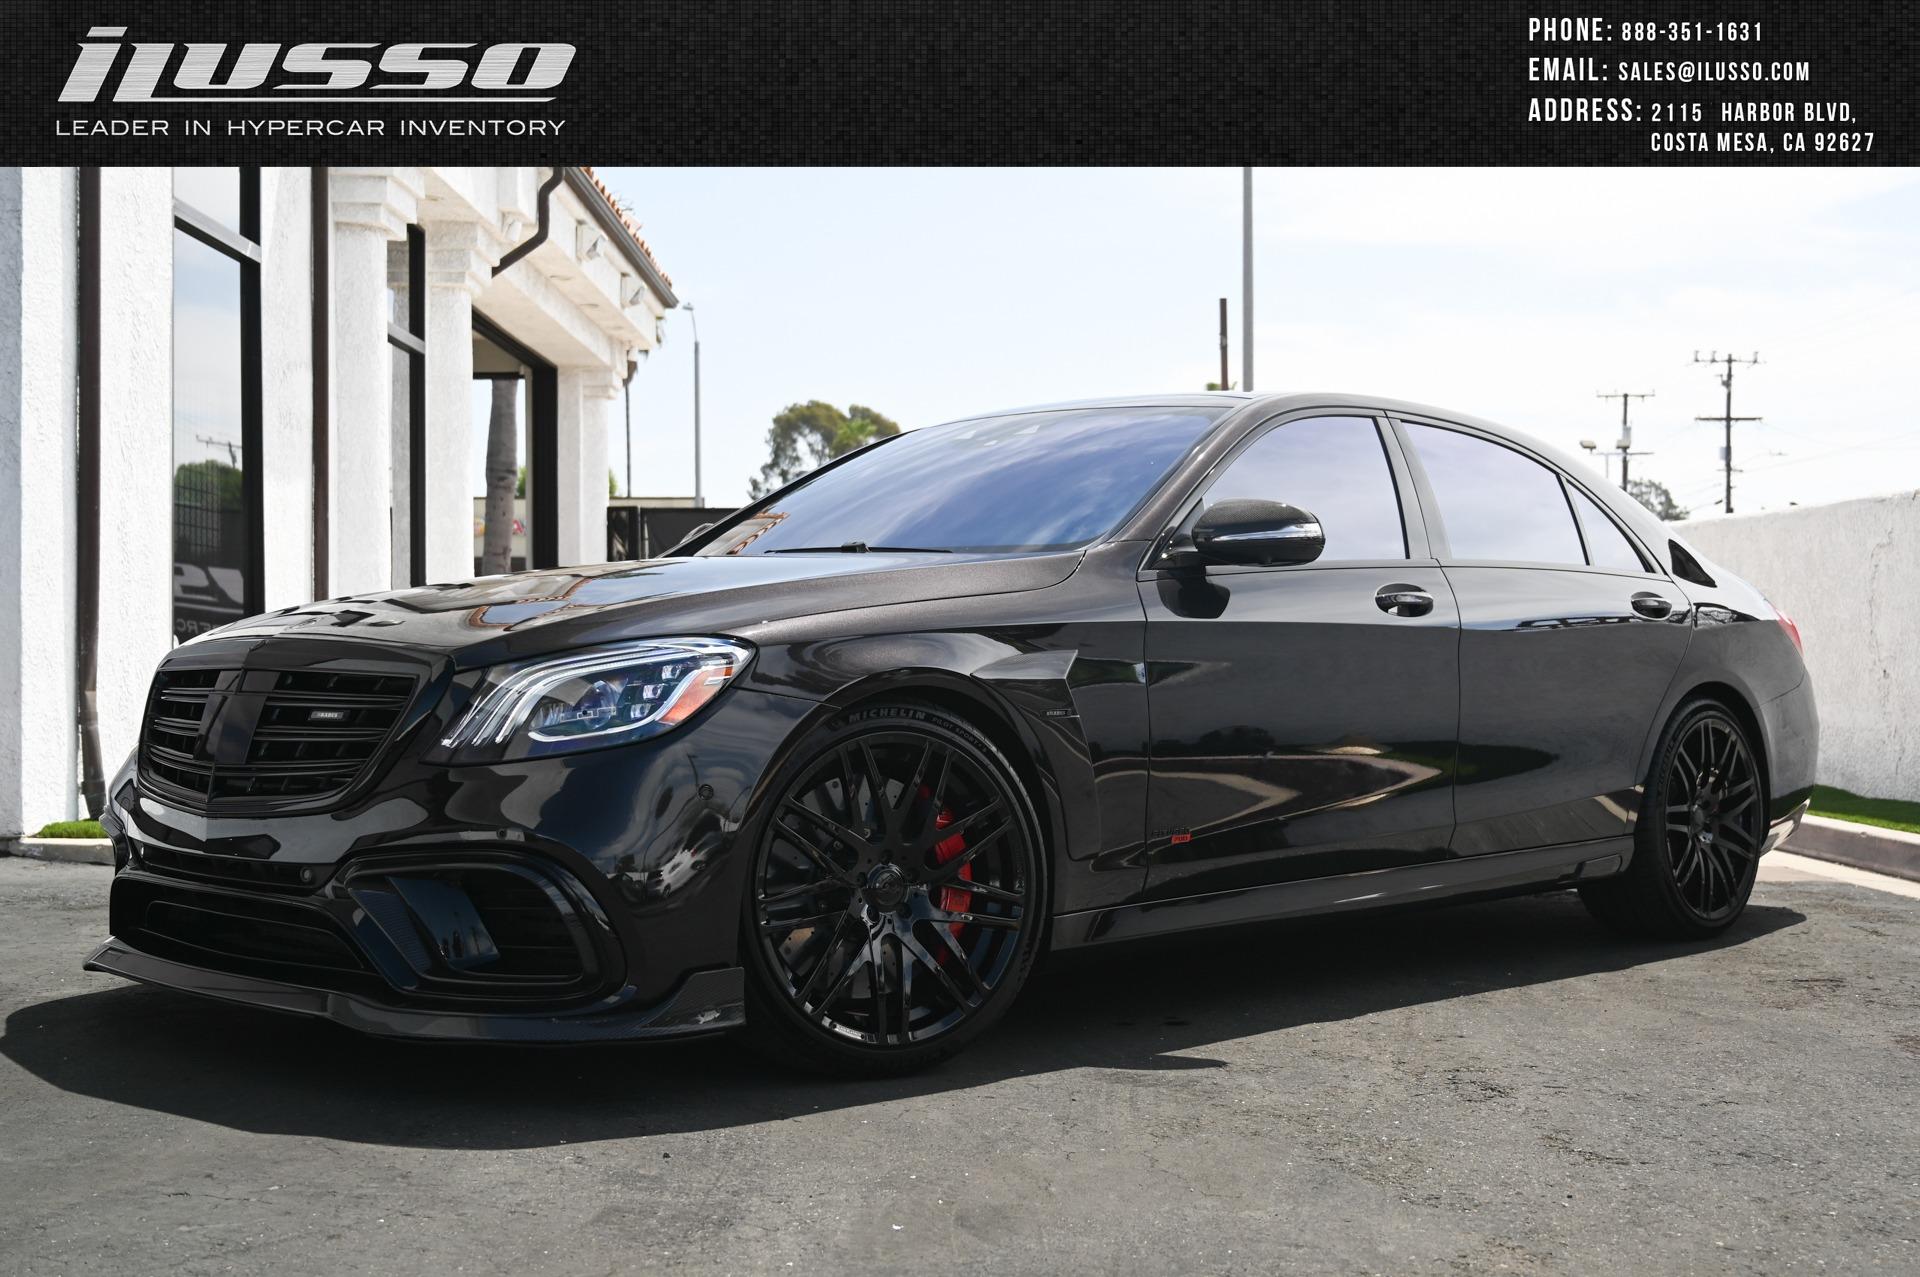 Used 2018 Mercedes Benz S Class Amg S 63 S700 For Sale Sold Ilusso Stock C5509